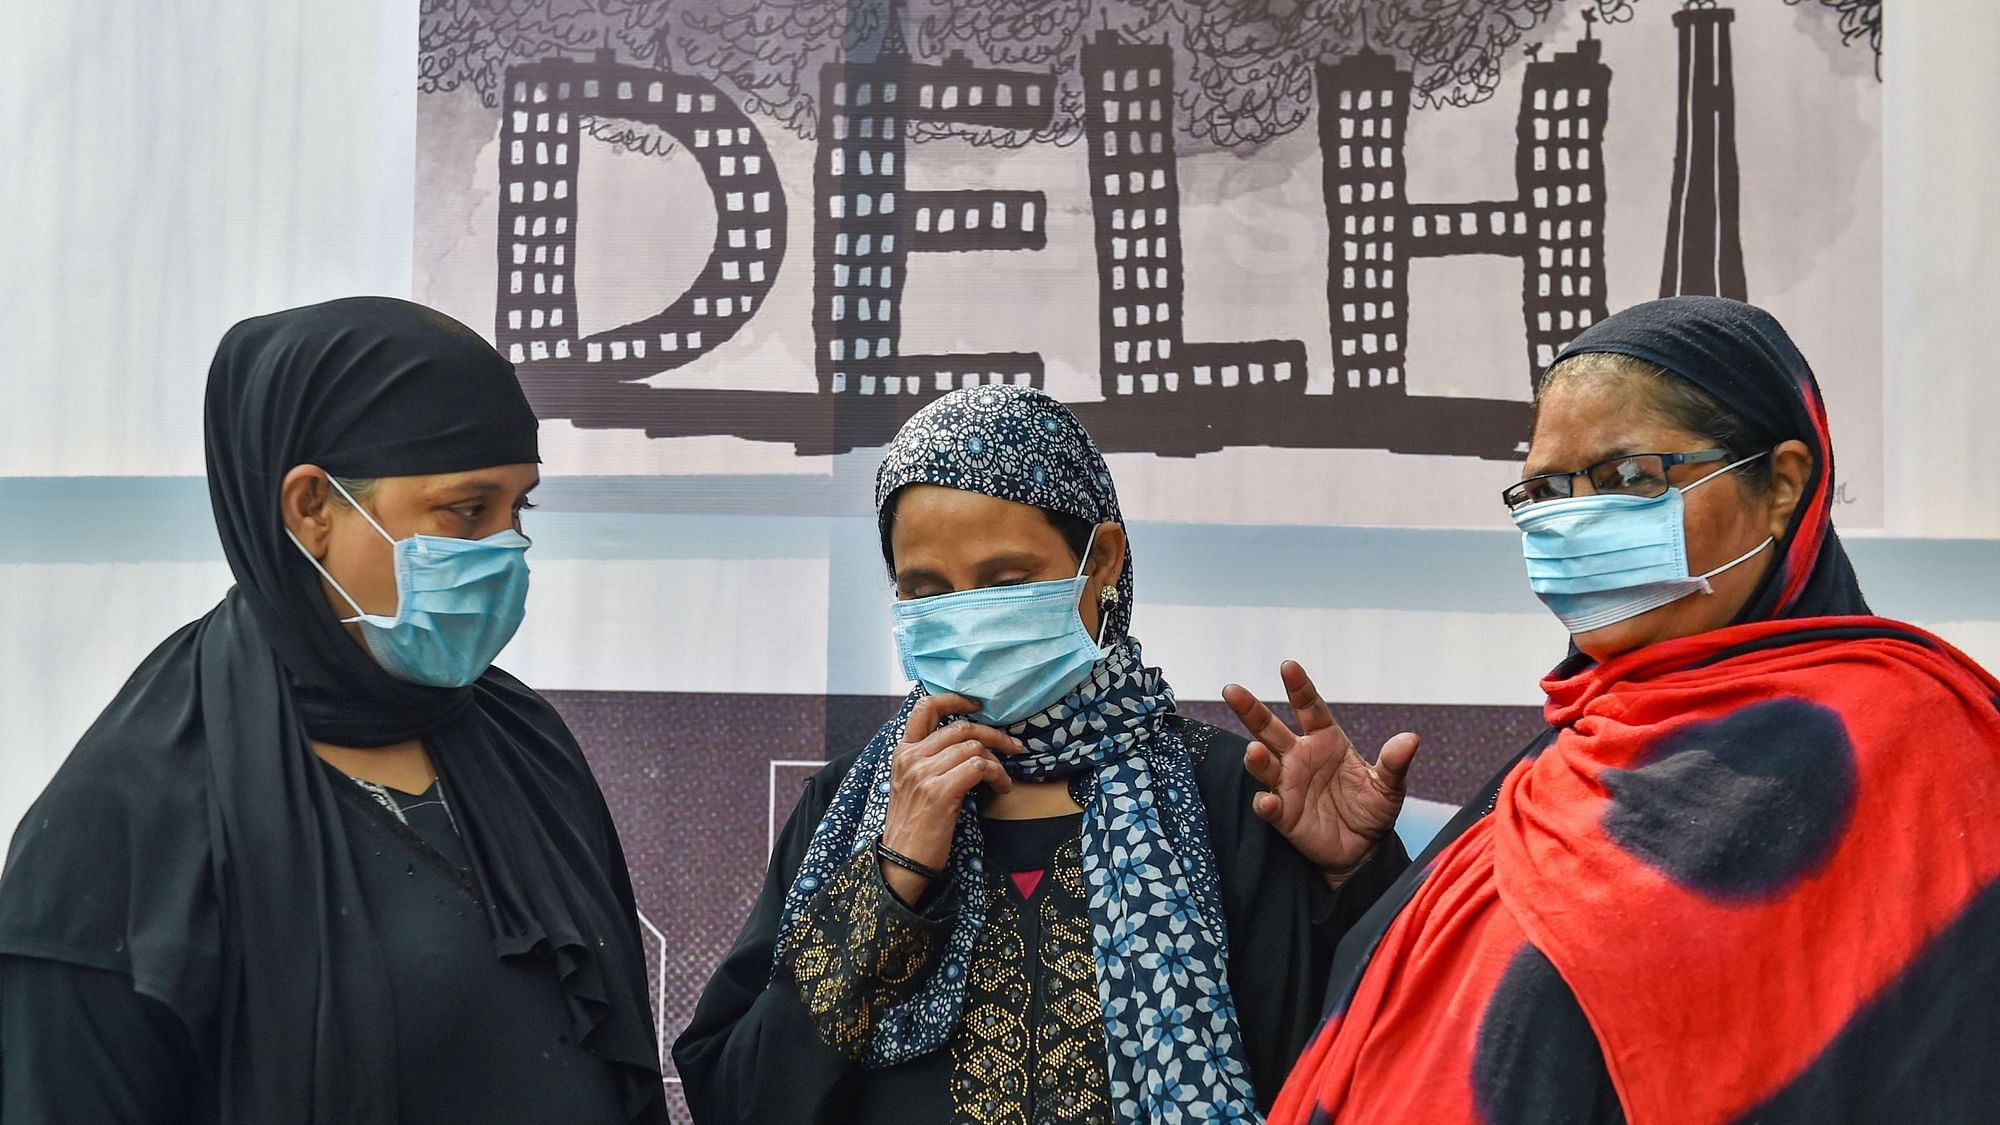  Women are seen wearing masks to get protection from air-pollution.